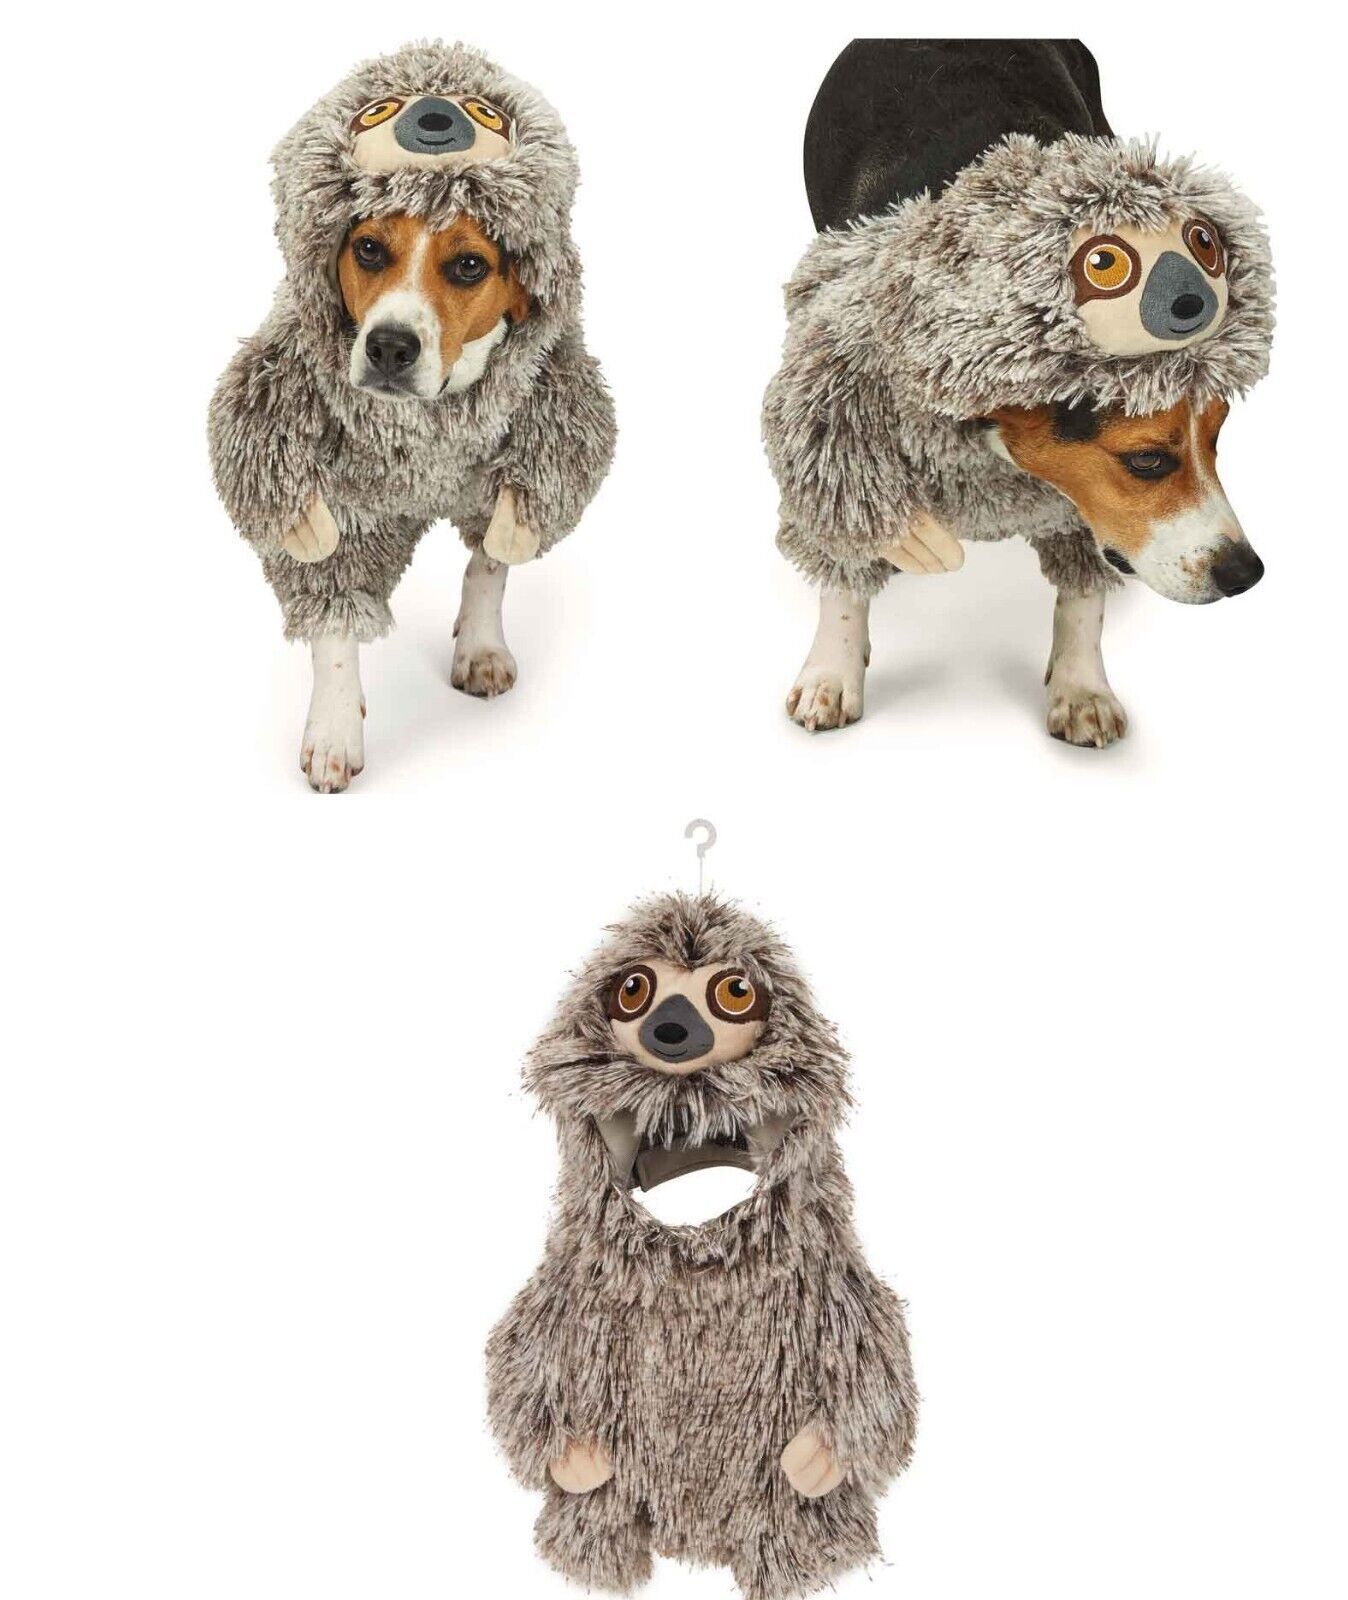 Sloth Costume for Dogs Cute Funny Plush Soft Fuzzy Easy Fit Adorable - £23.71 GBP - £26.88 GBP